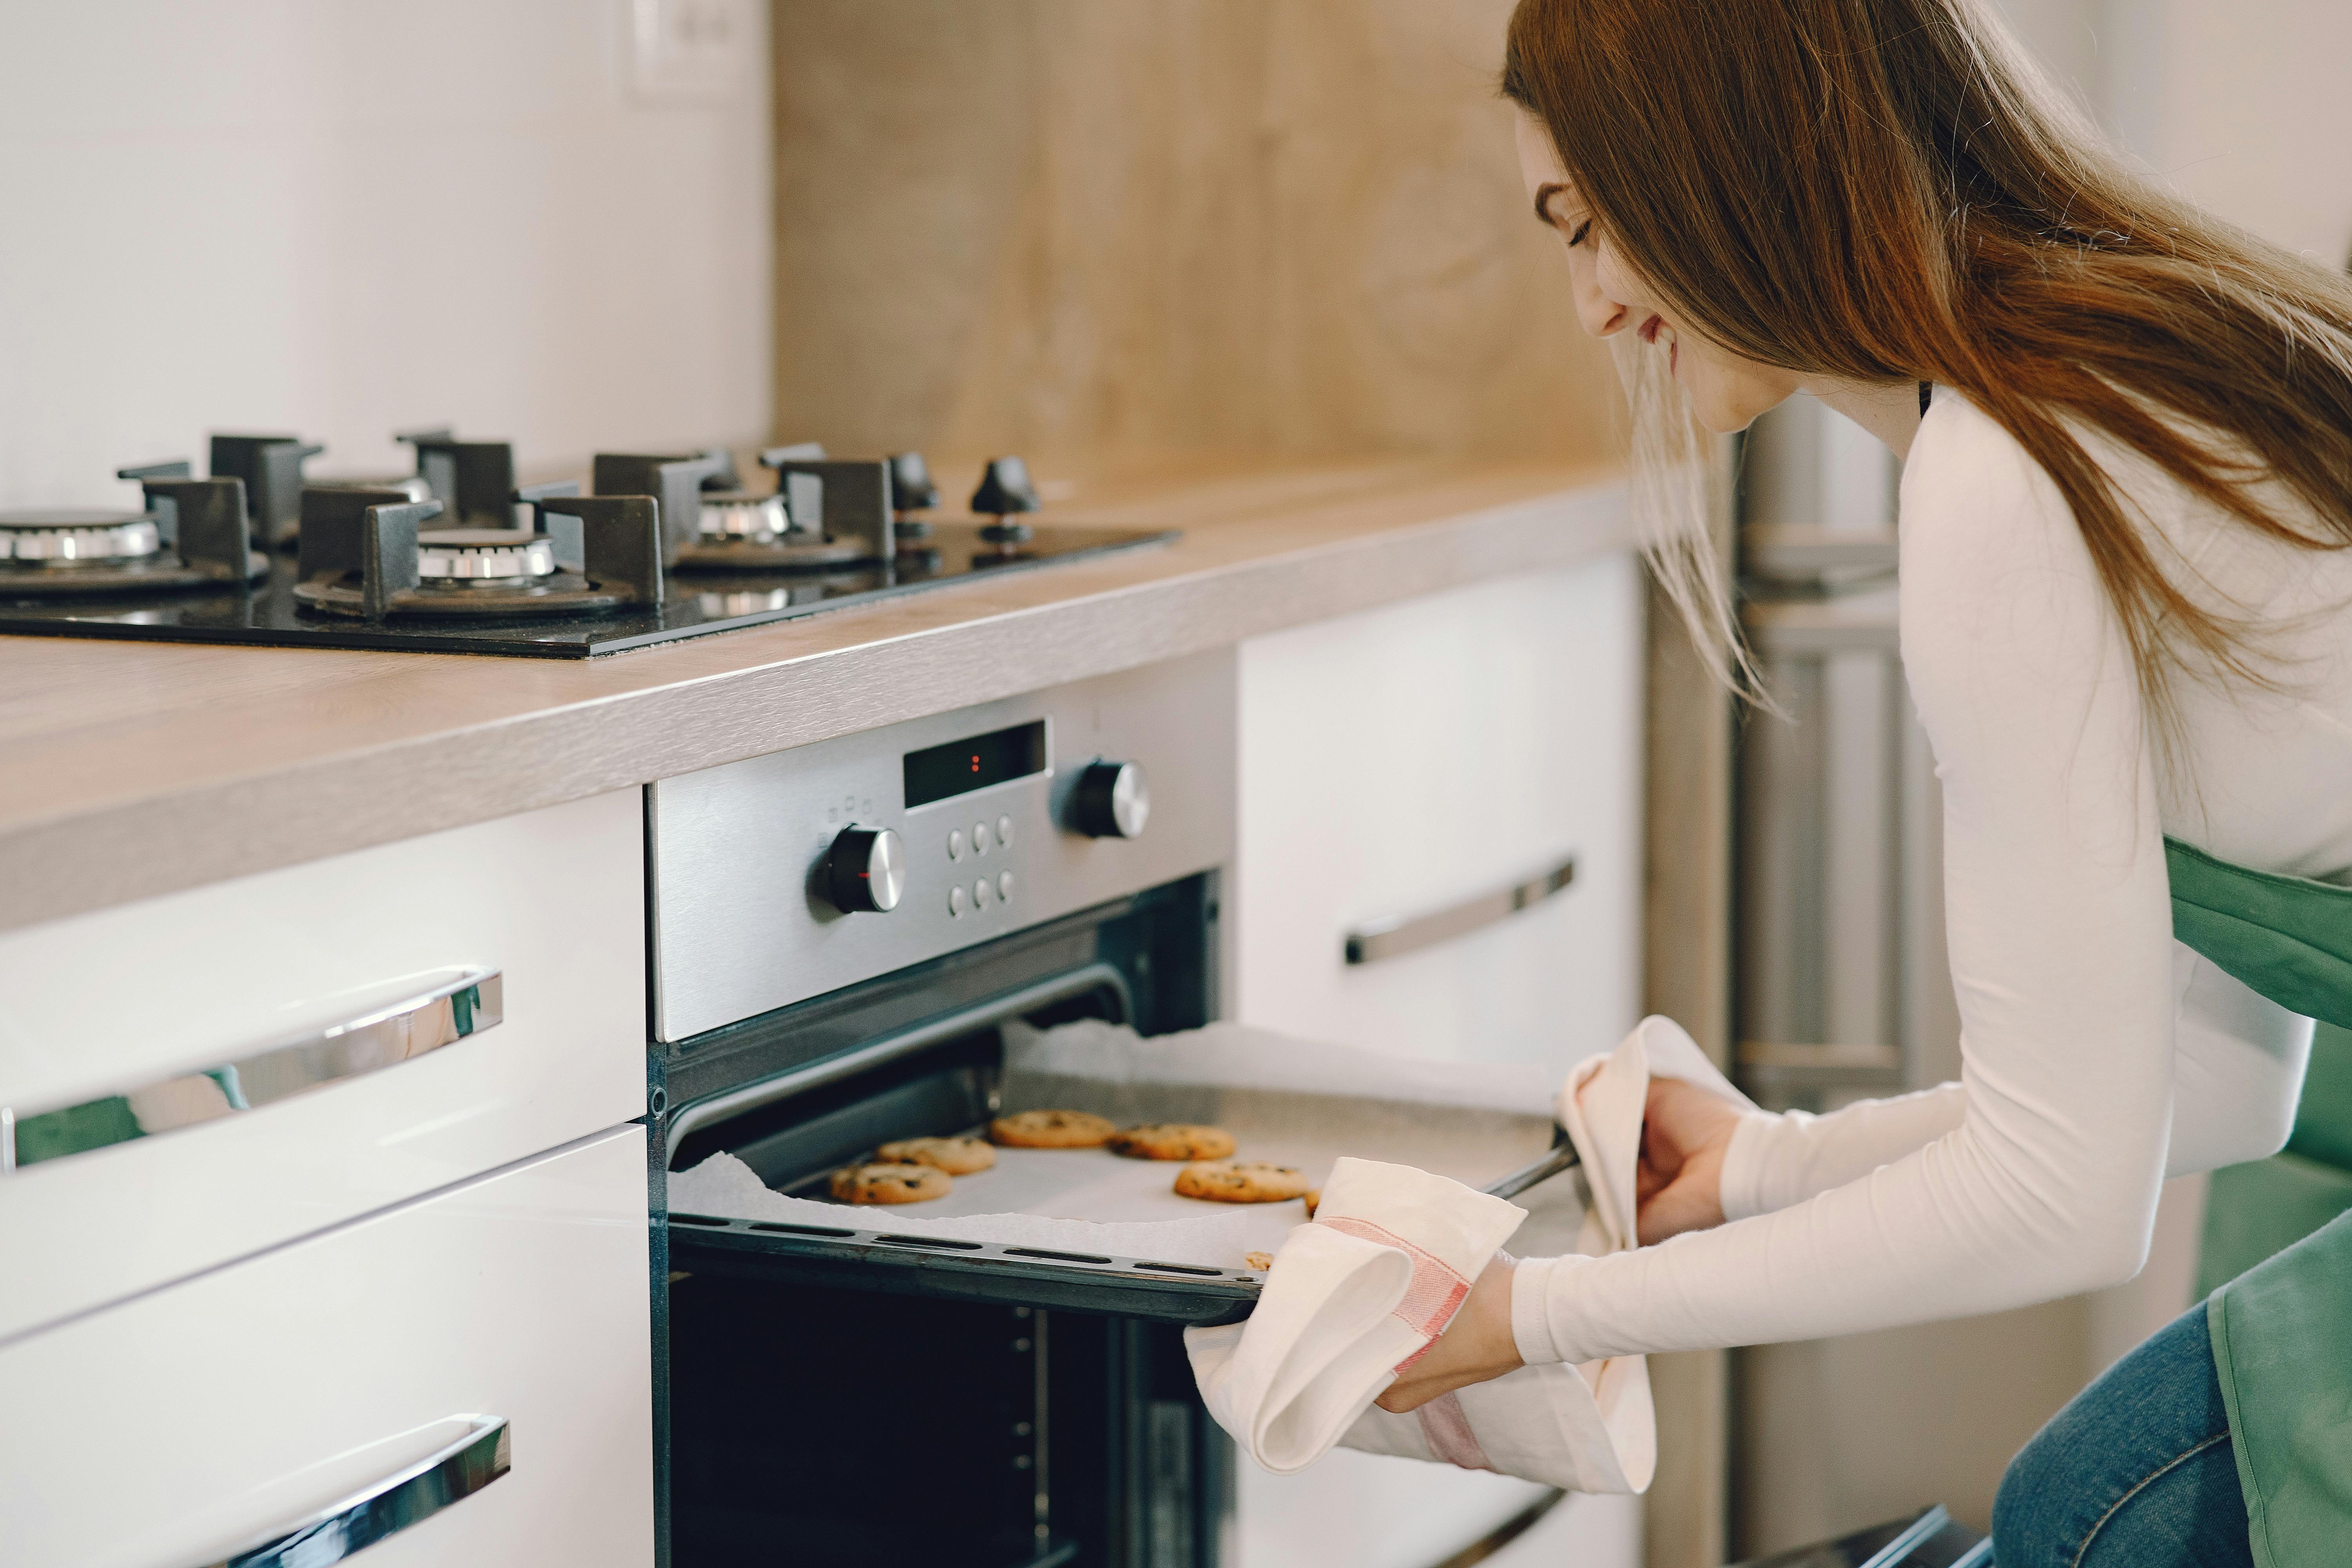 Woman taking out cookies | Source: Pexels